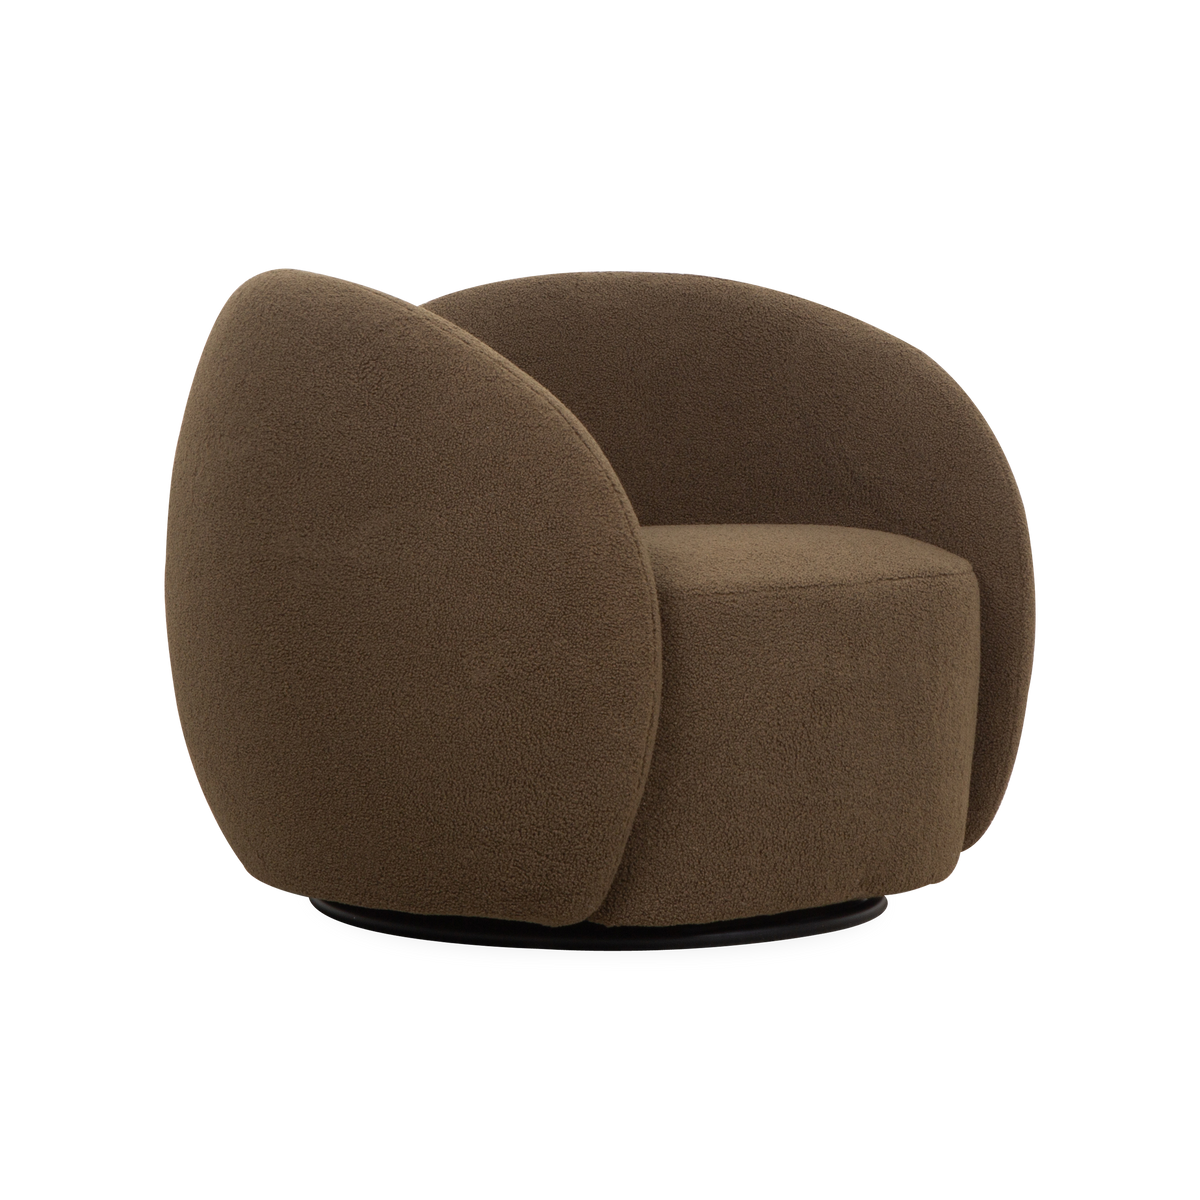 Uber soft, the Alpine Swivel Chair introduces distinctive curves that will have you sitting you in style.